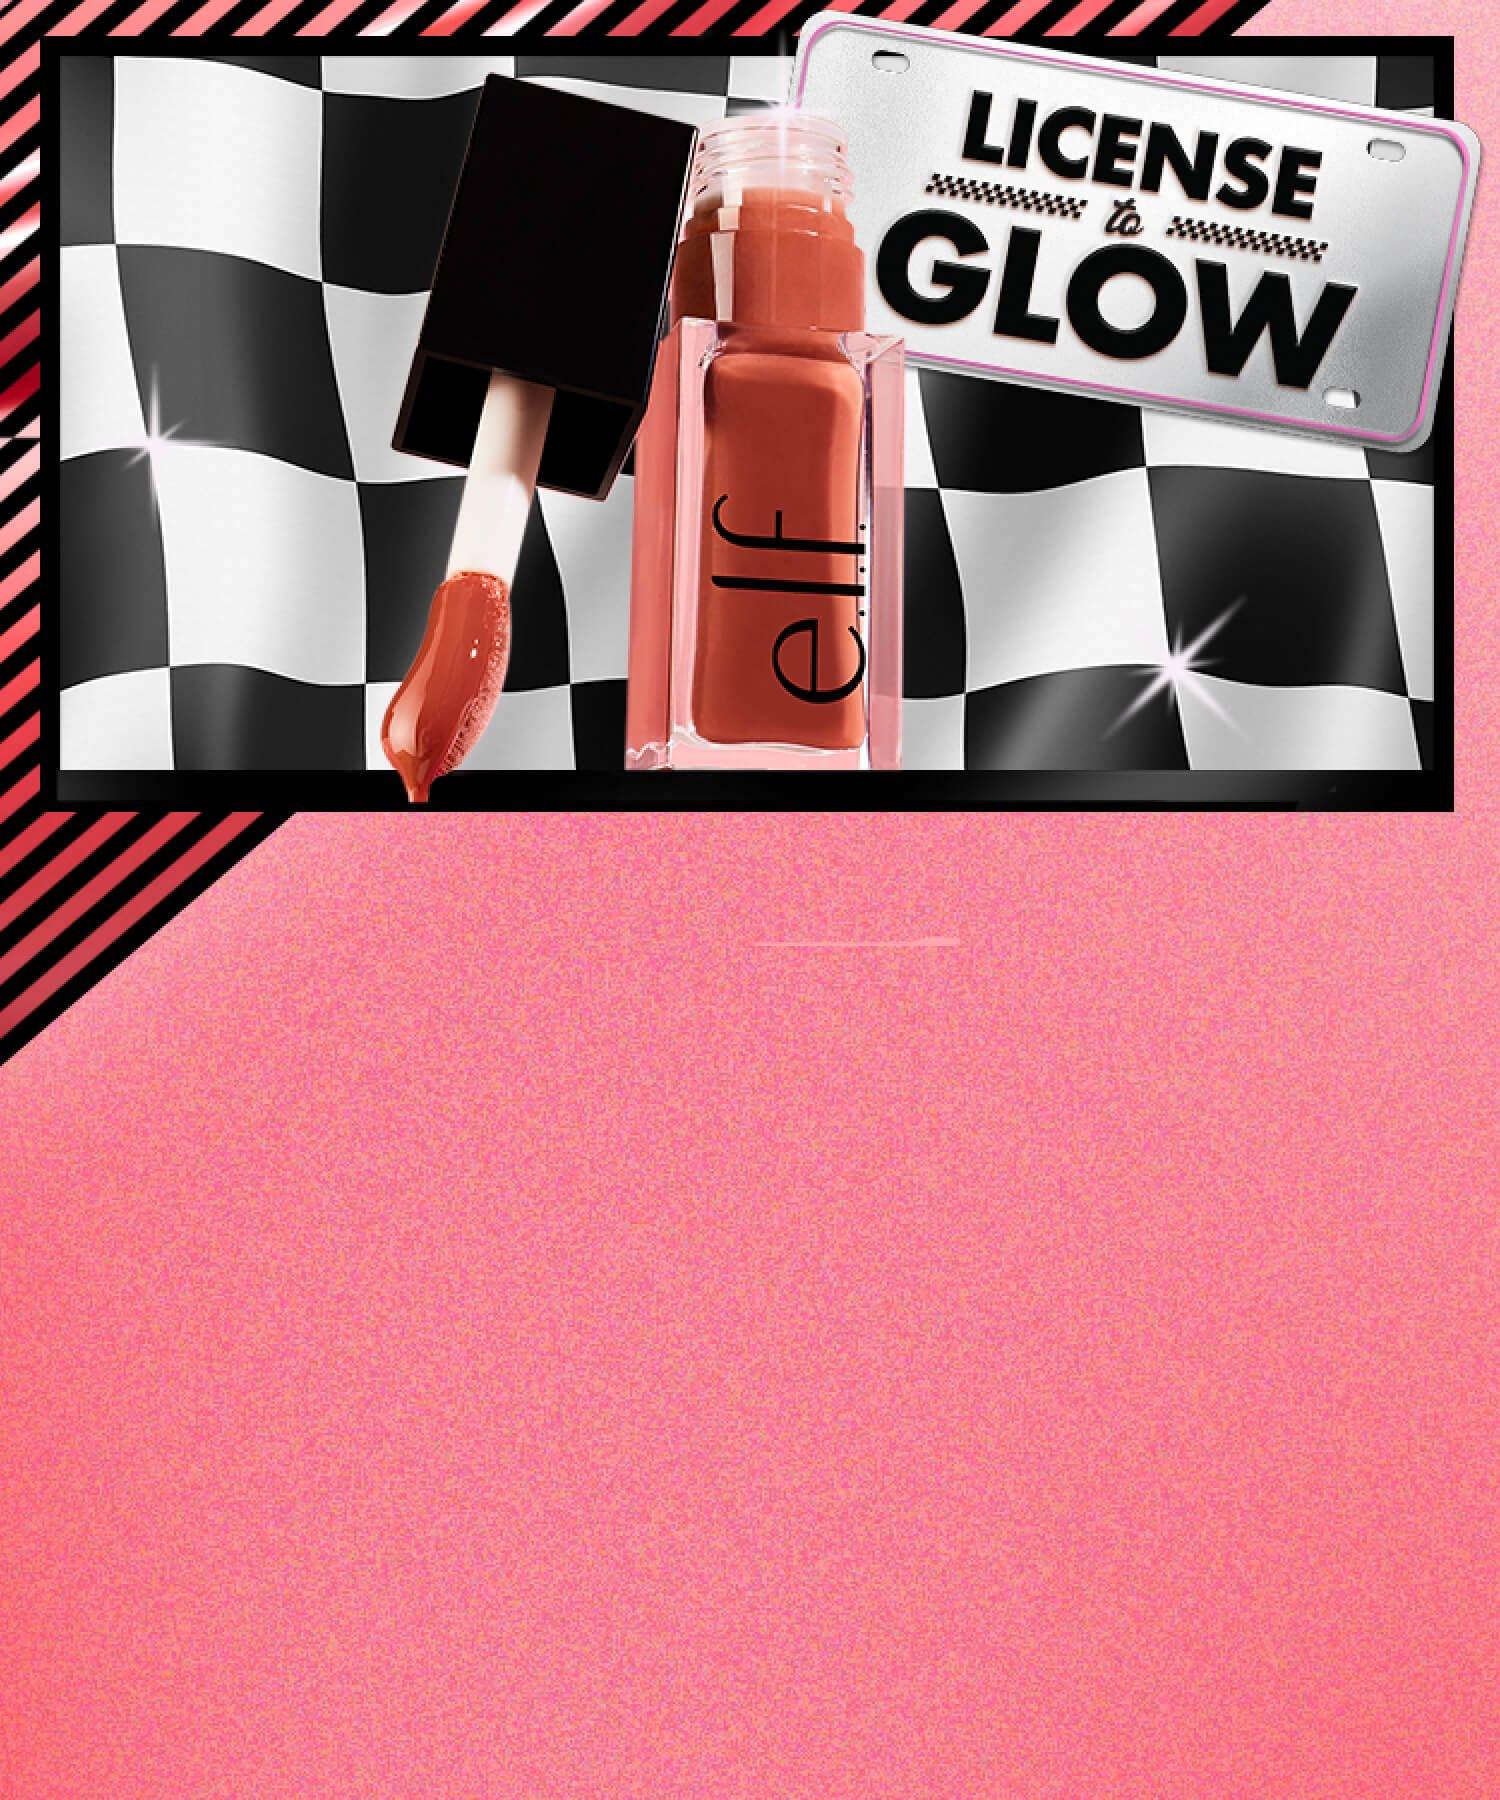 e.l.f. Glow Reviver Lip Oil with LICENSE to GLOW plate